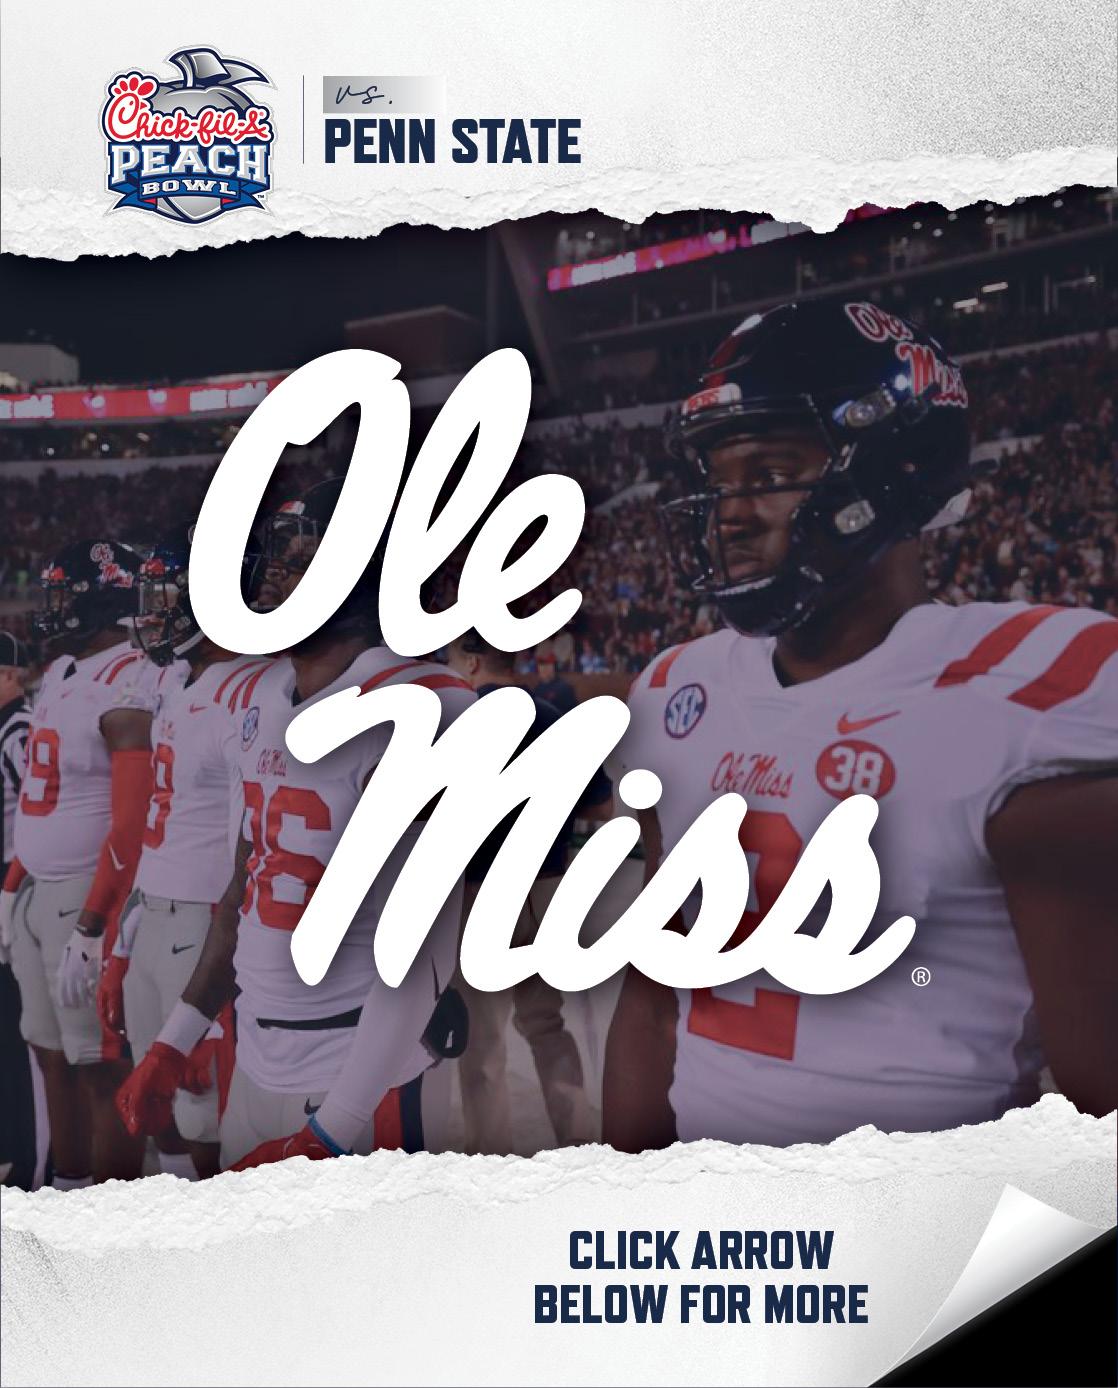 Chick-fil-A Peach Bowl - Ole Miss Rebels VS Penn State Nittany Lions